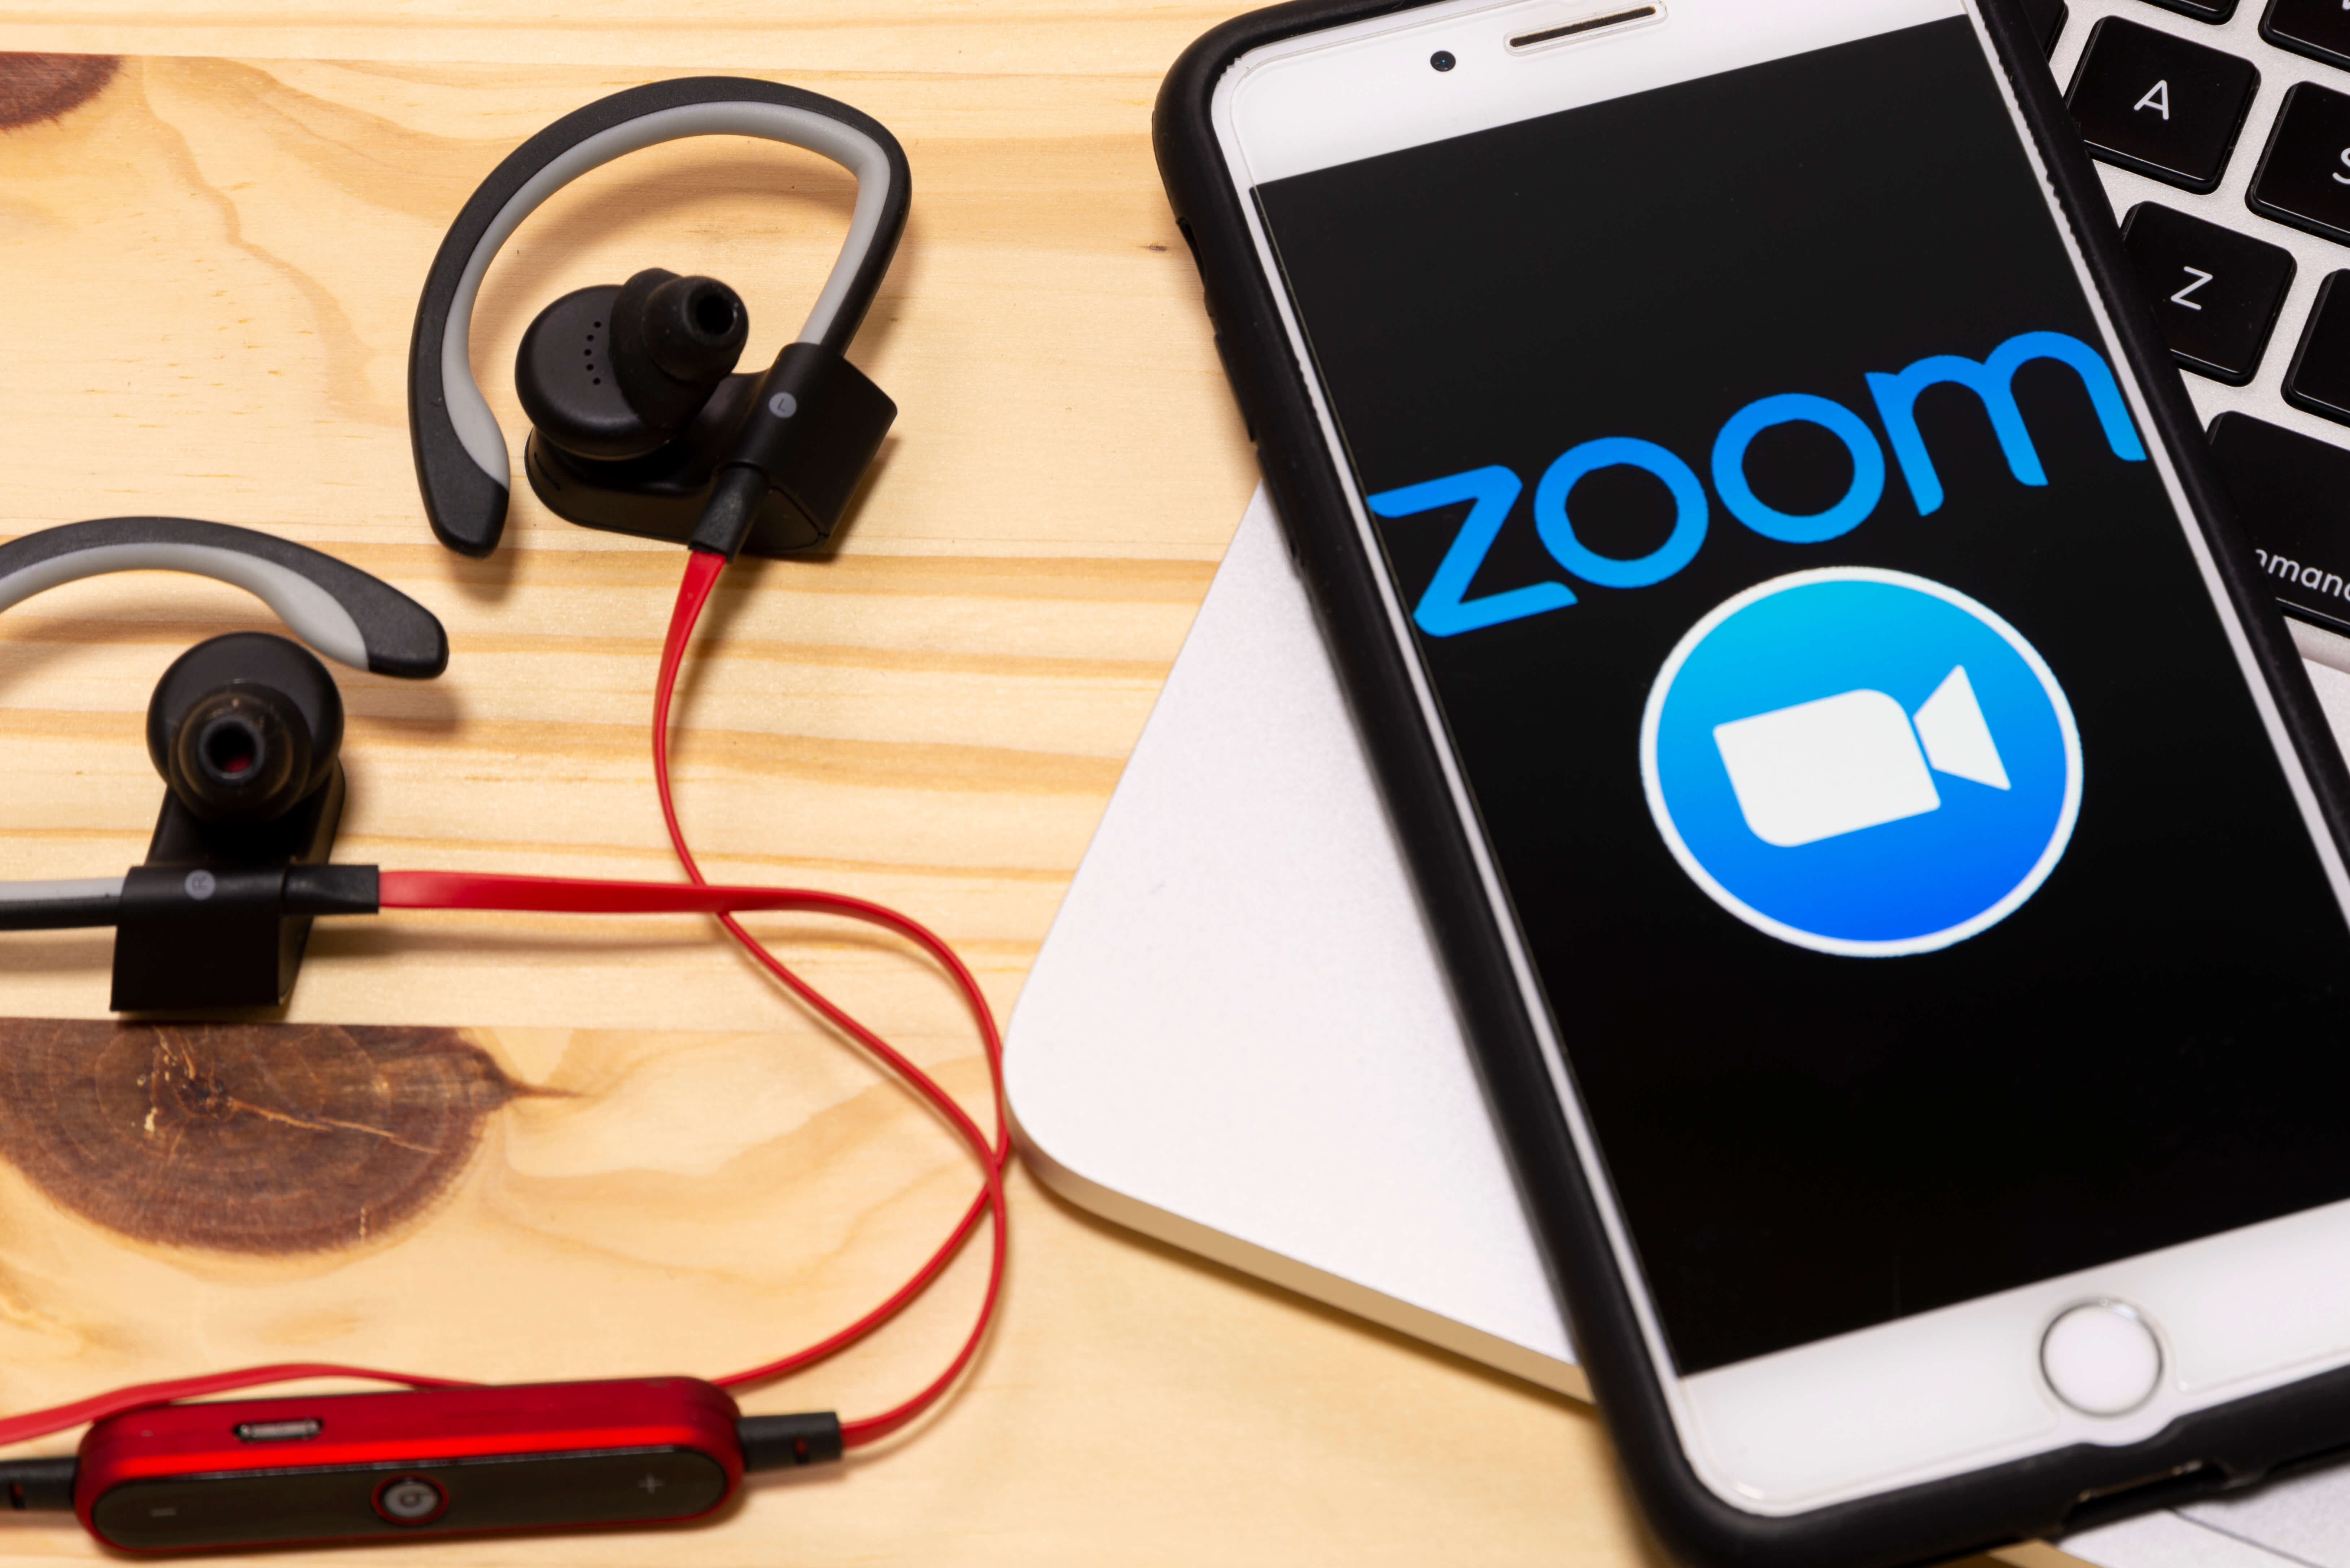 The teleconferencing tool Zoom has become an overnight sensation. Source: Shutterstock.